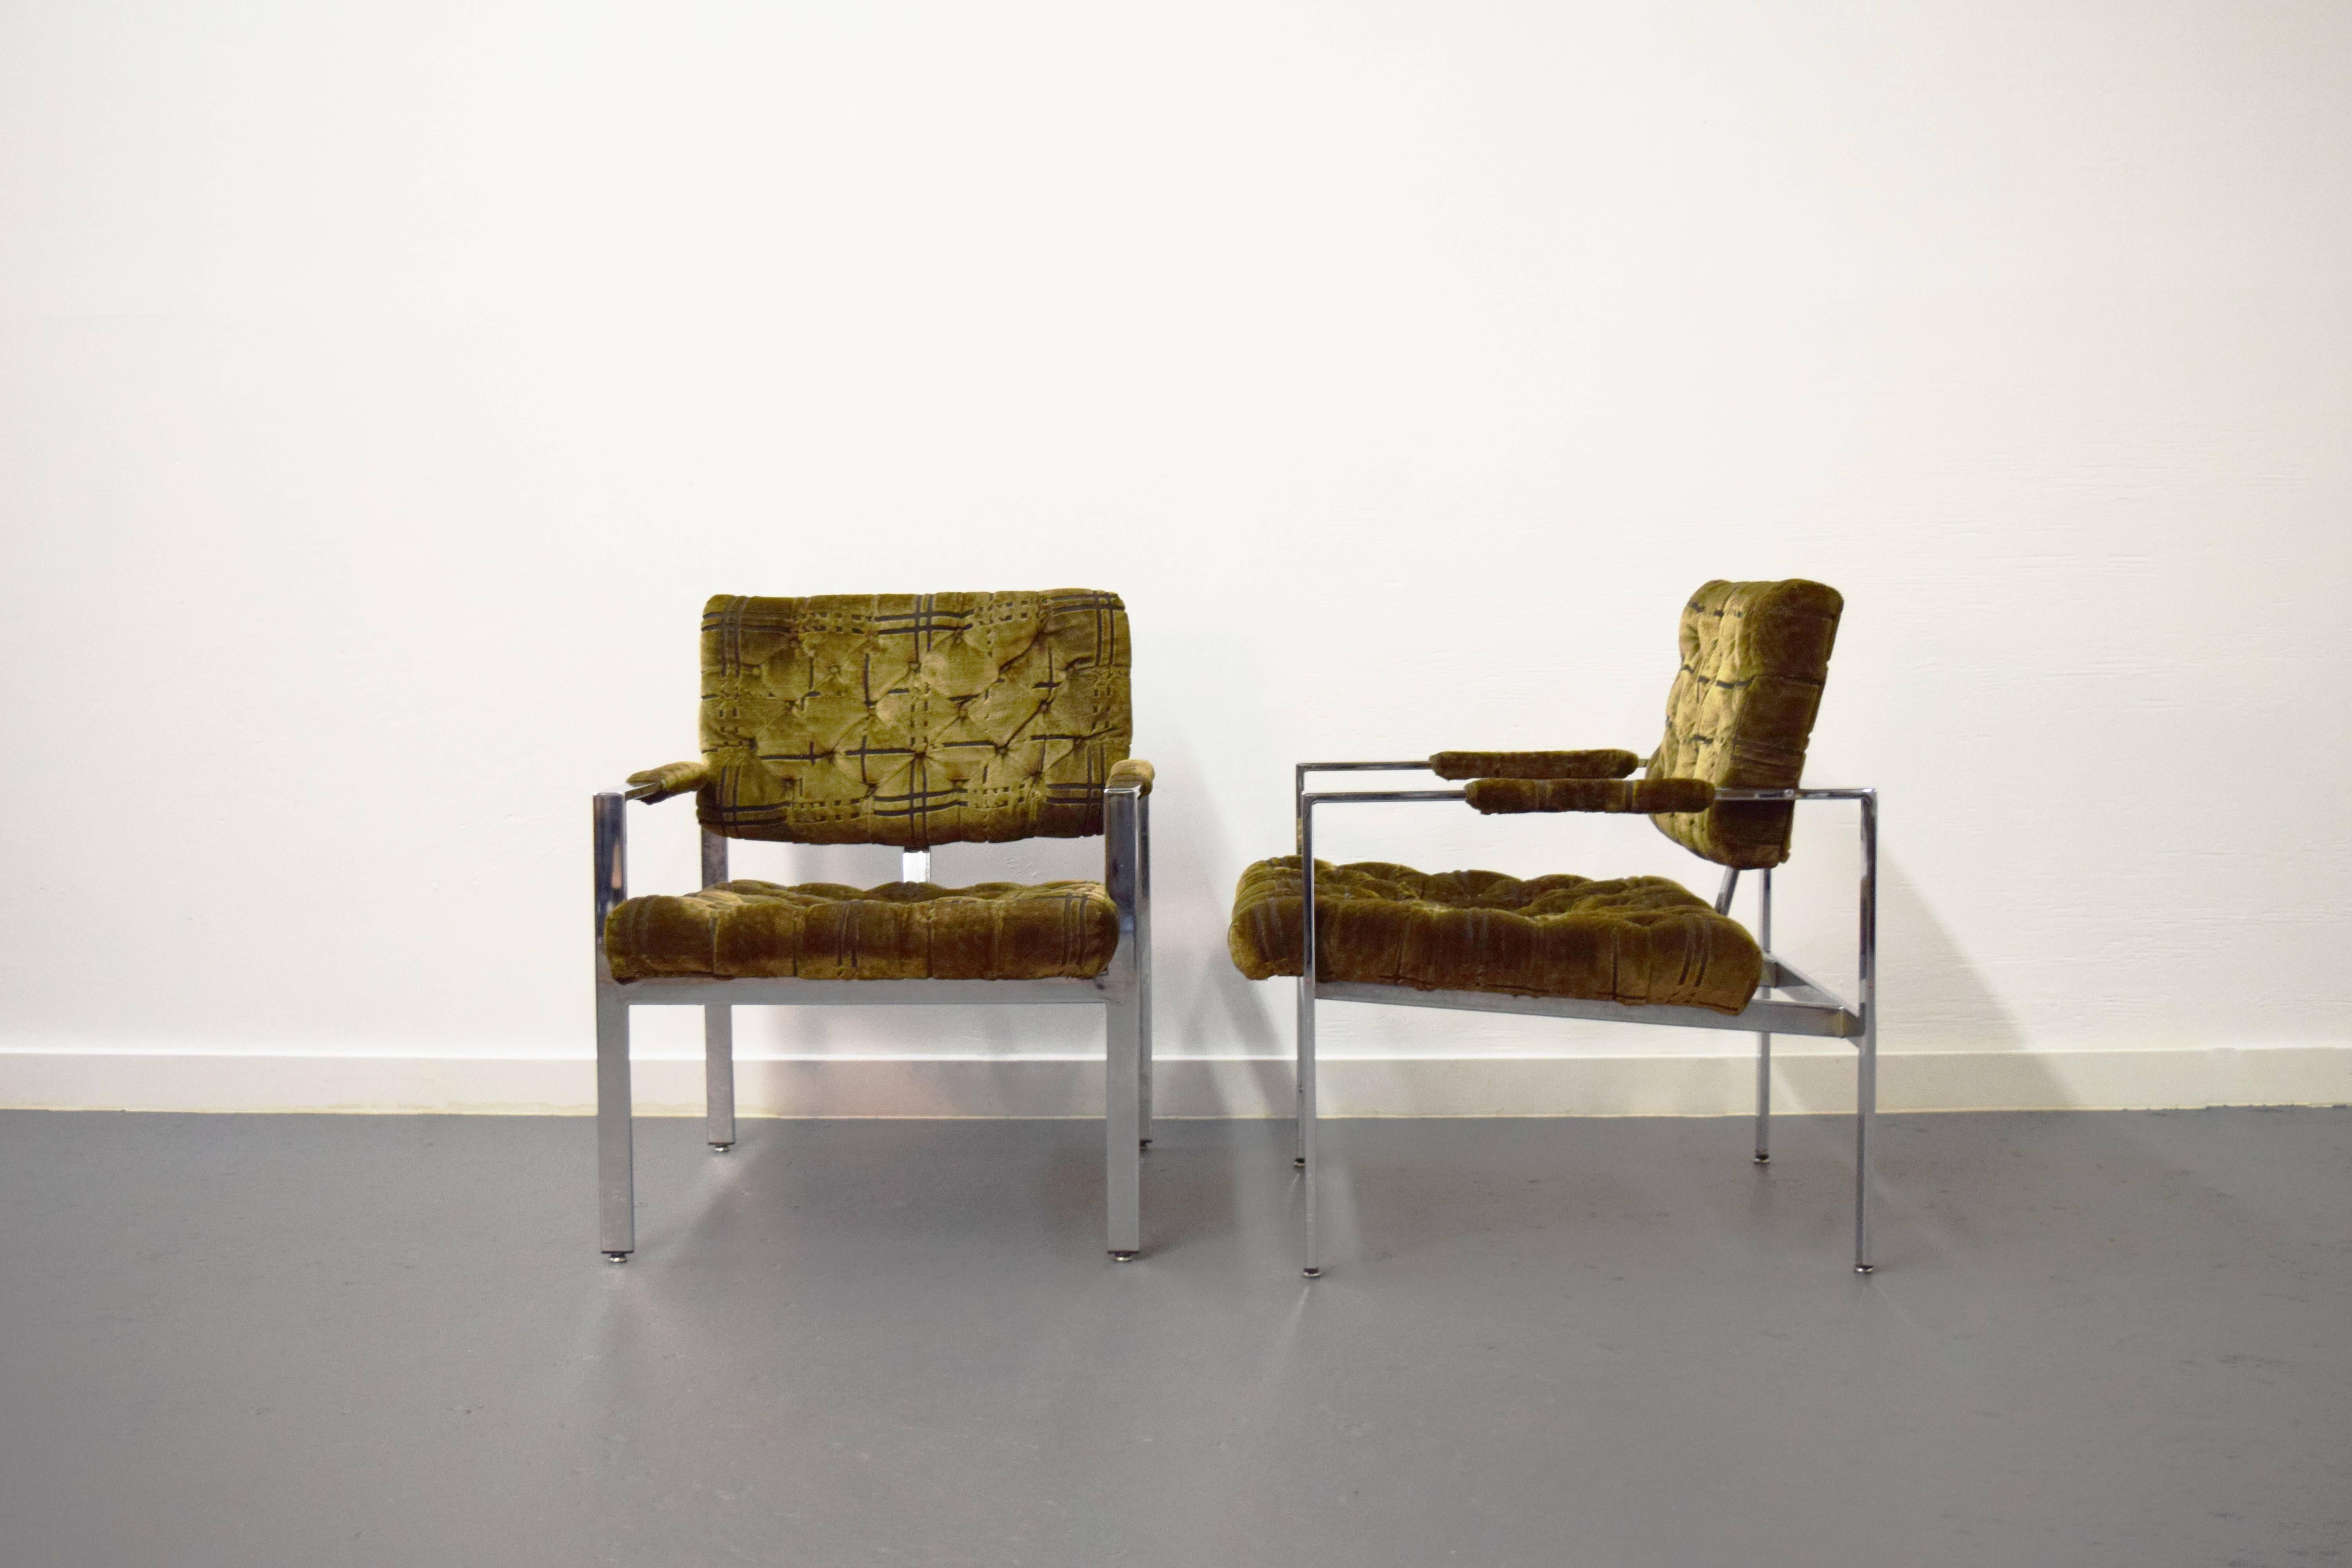 20th Century Pair of Milo Baughman for Thayer Coggin Tufted Chrome Lounge Chairs